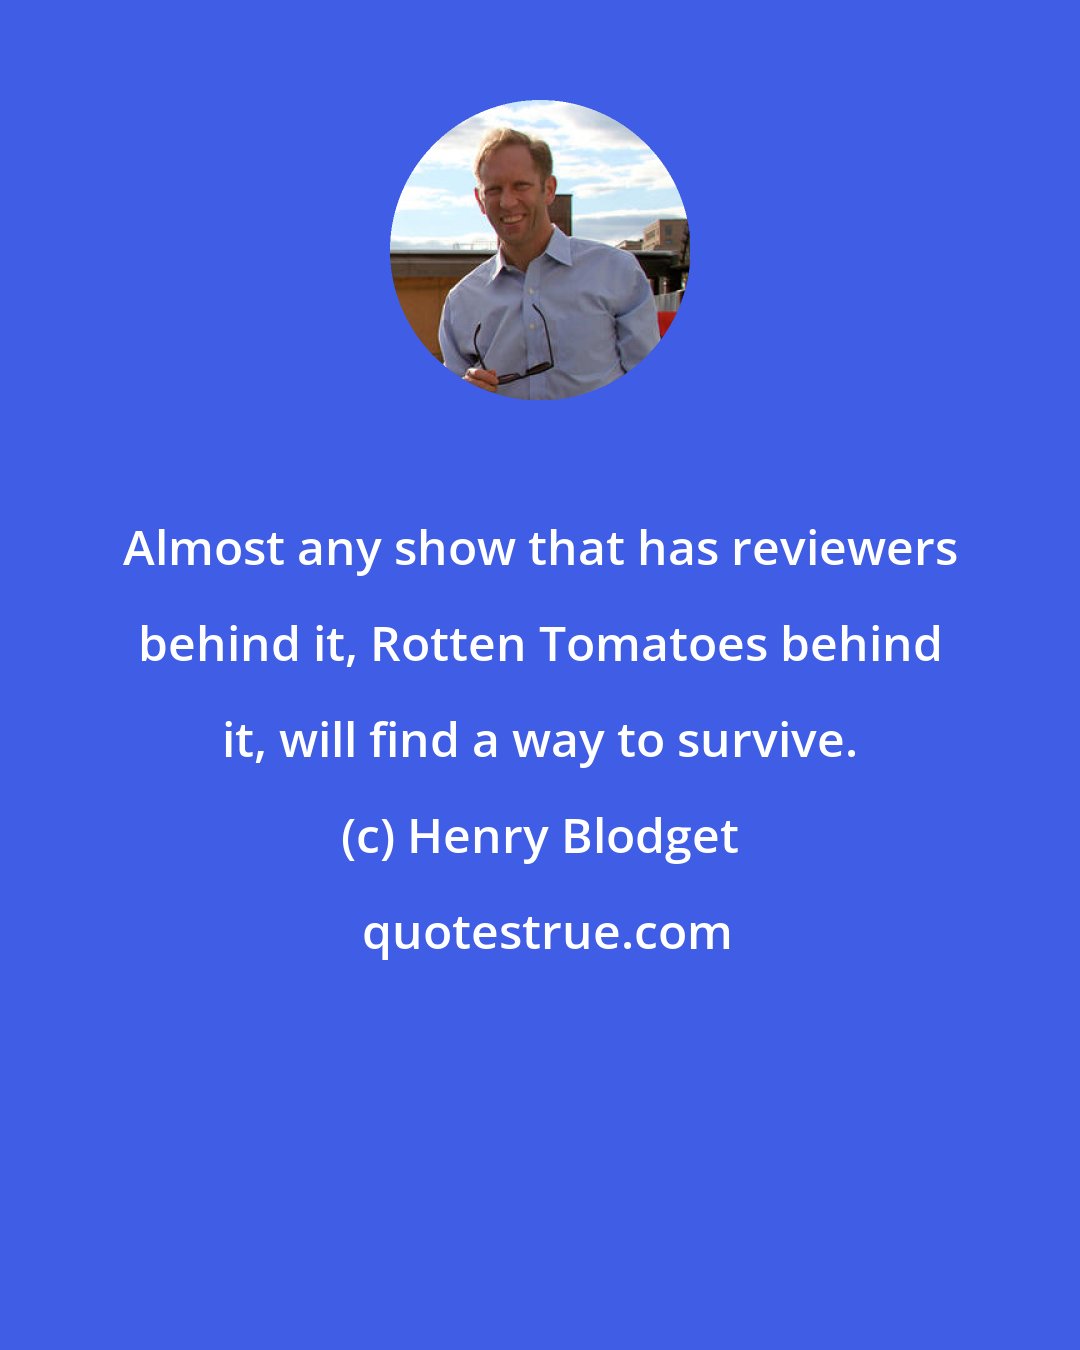 Henry Blodget: Almost any show that has reviewers behind it, Rotten Tomatoes behind it, will find a way to survive.